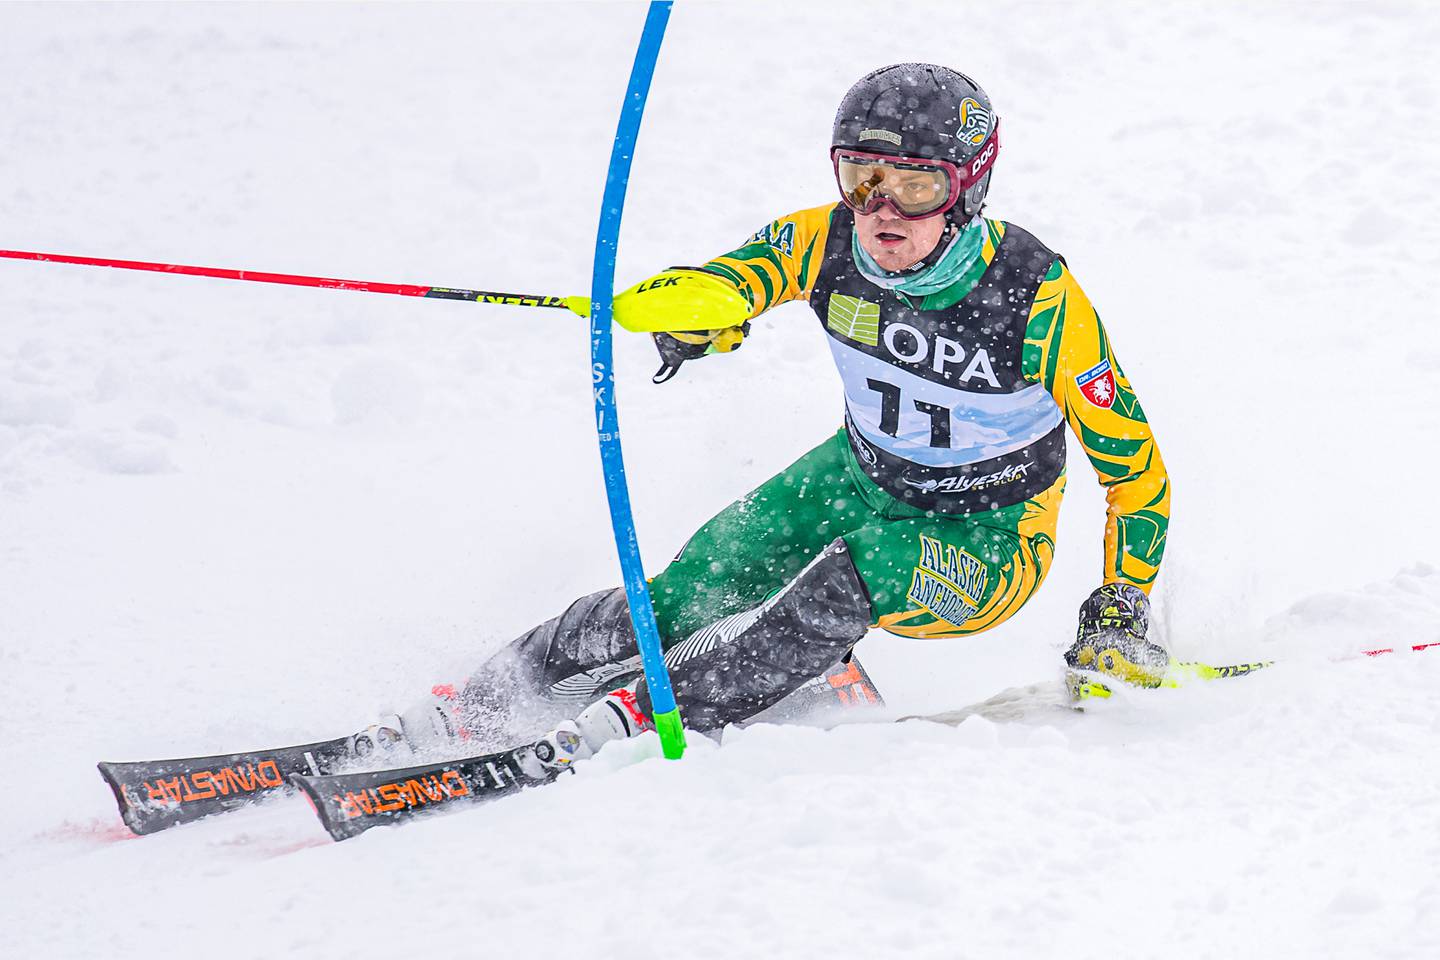 UAA senior Michael Soetaert clears a gate on his way to victory in the final race of his FIS racing career on Thursday, March 25, 2021 at snowy Alyeska Ski Resort. Soetaert won the second of two slalom races at the Western Region FIS Tech Series. (Photo by Bob Eastaugh)